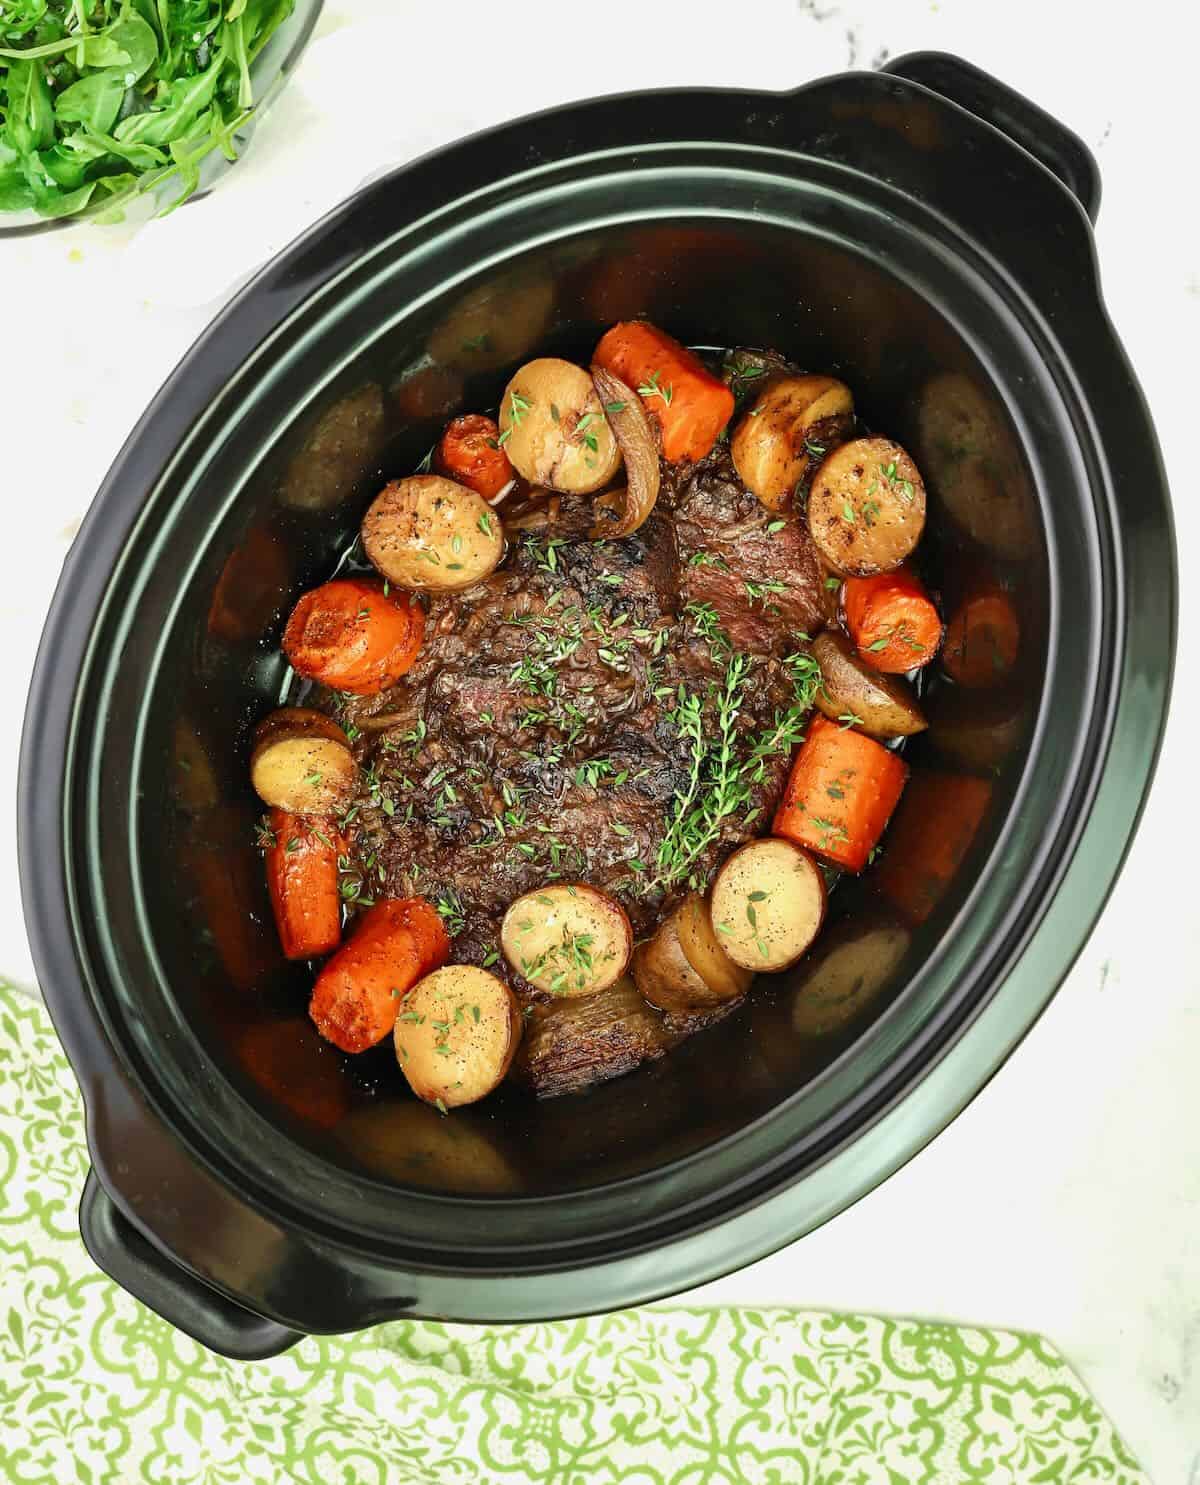 A crock-pot with a pot roast surrounded by potatoes and carrots.